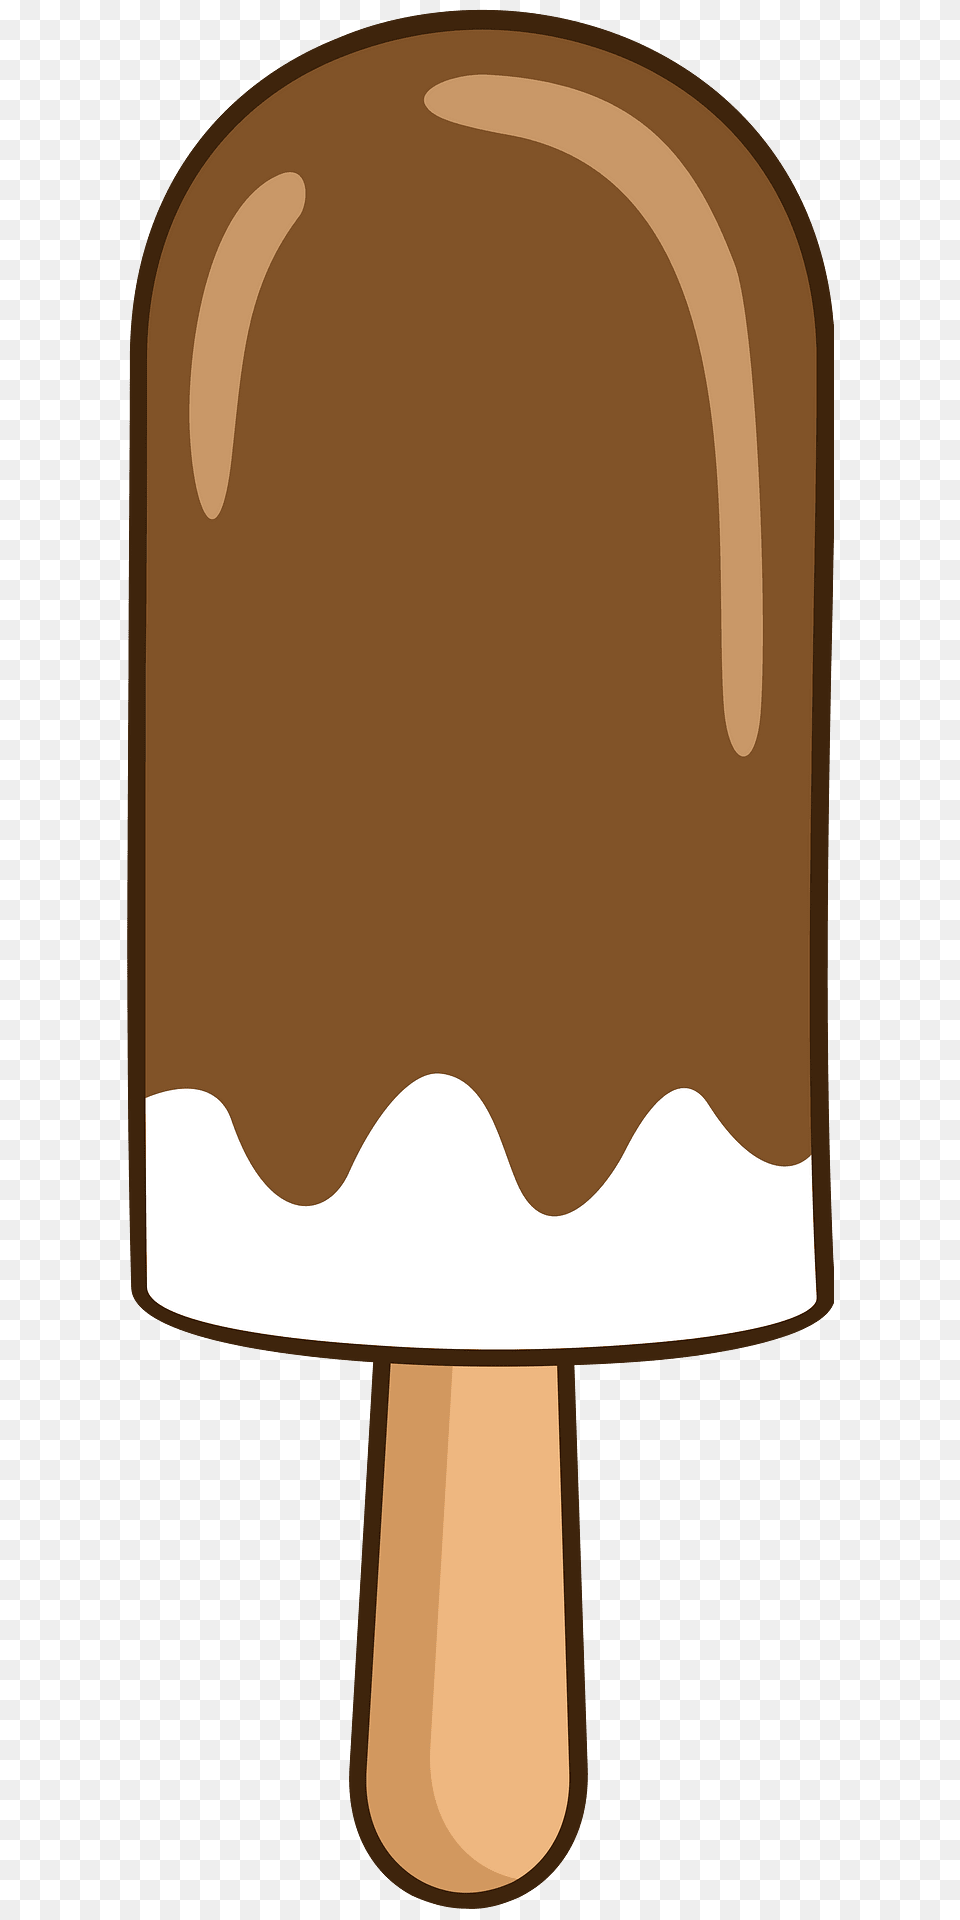 Icepop Clipart, Lamp, Food, Ice Pop Png